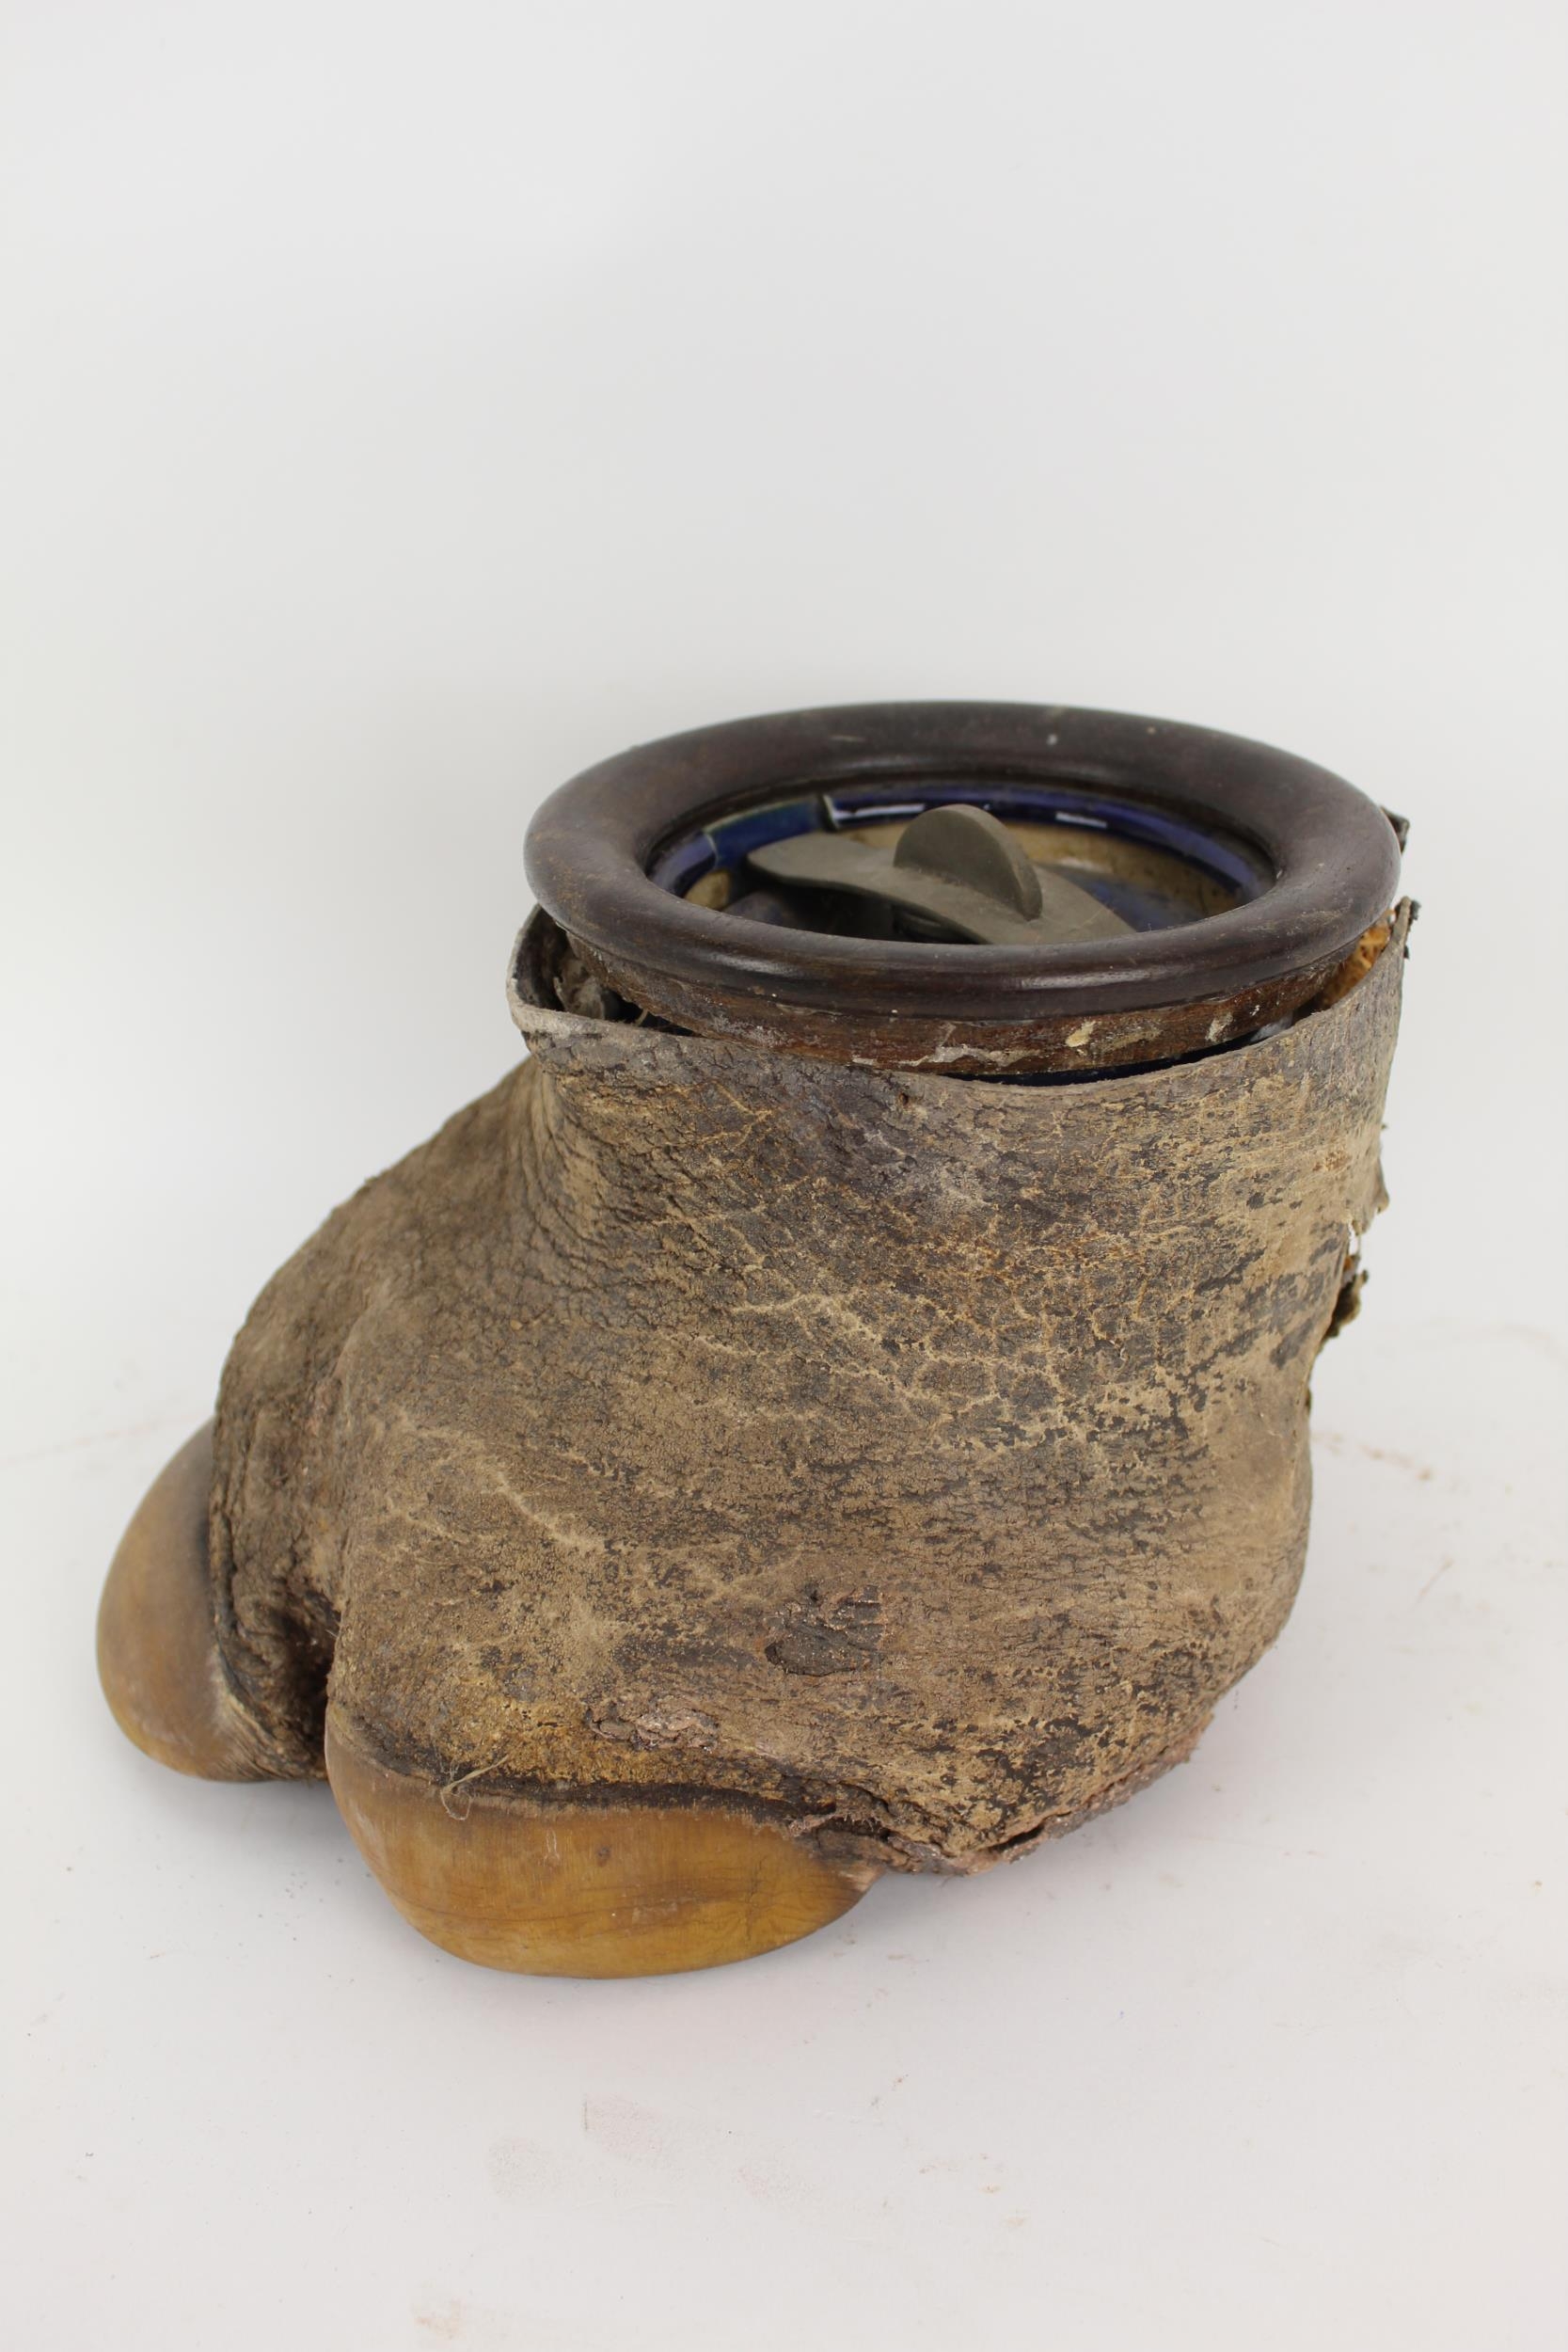 Taxidermy: An early 20th century rhinoceros foot, the centre holding a tobacco jar - Image 4 of 6